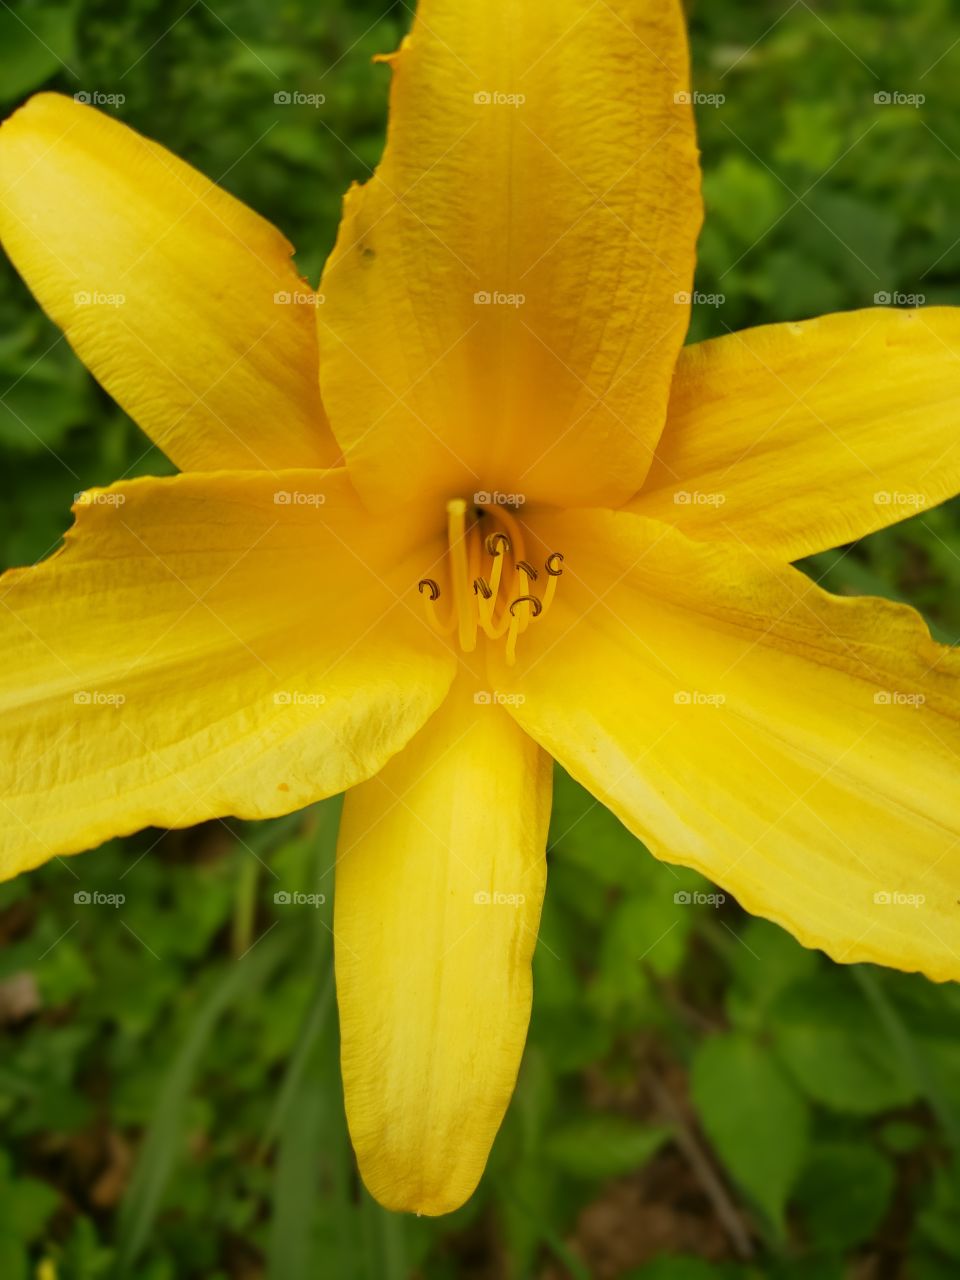 Vibrant yellow lily, flower close-up